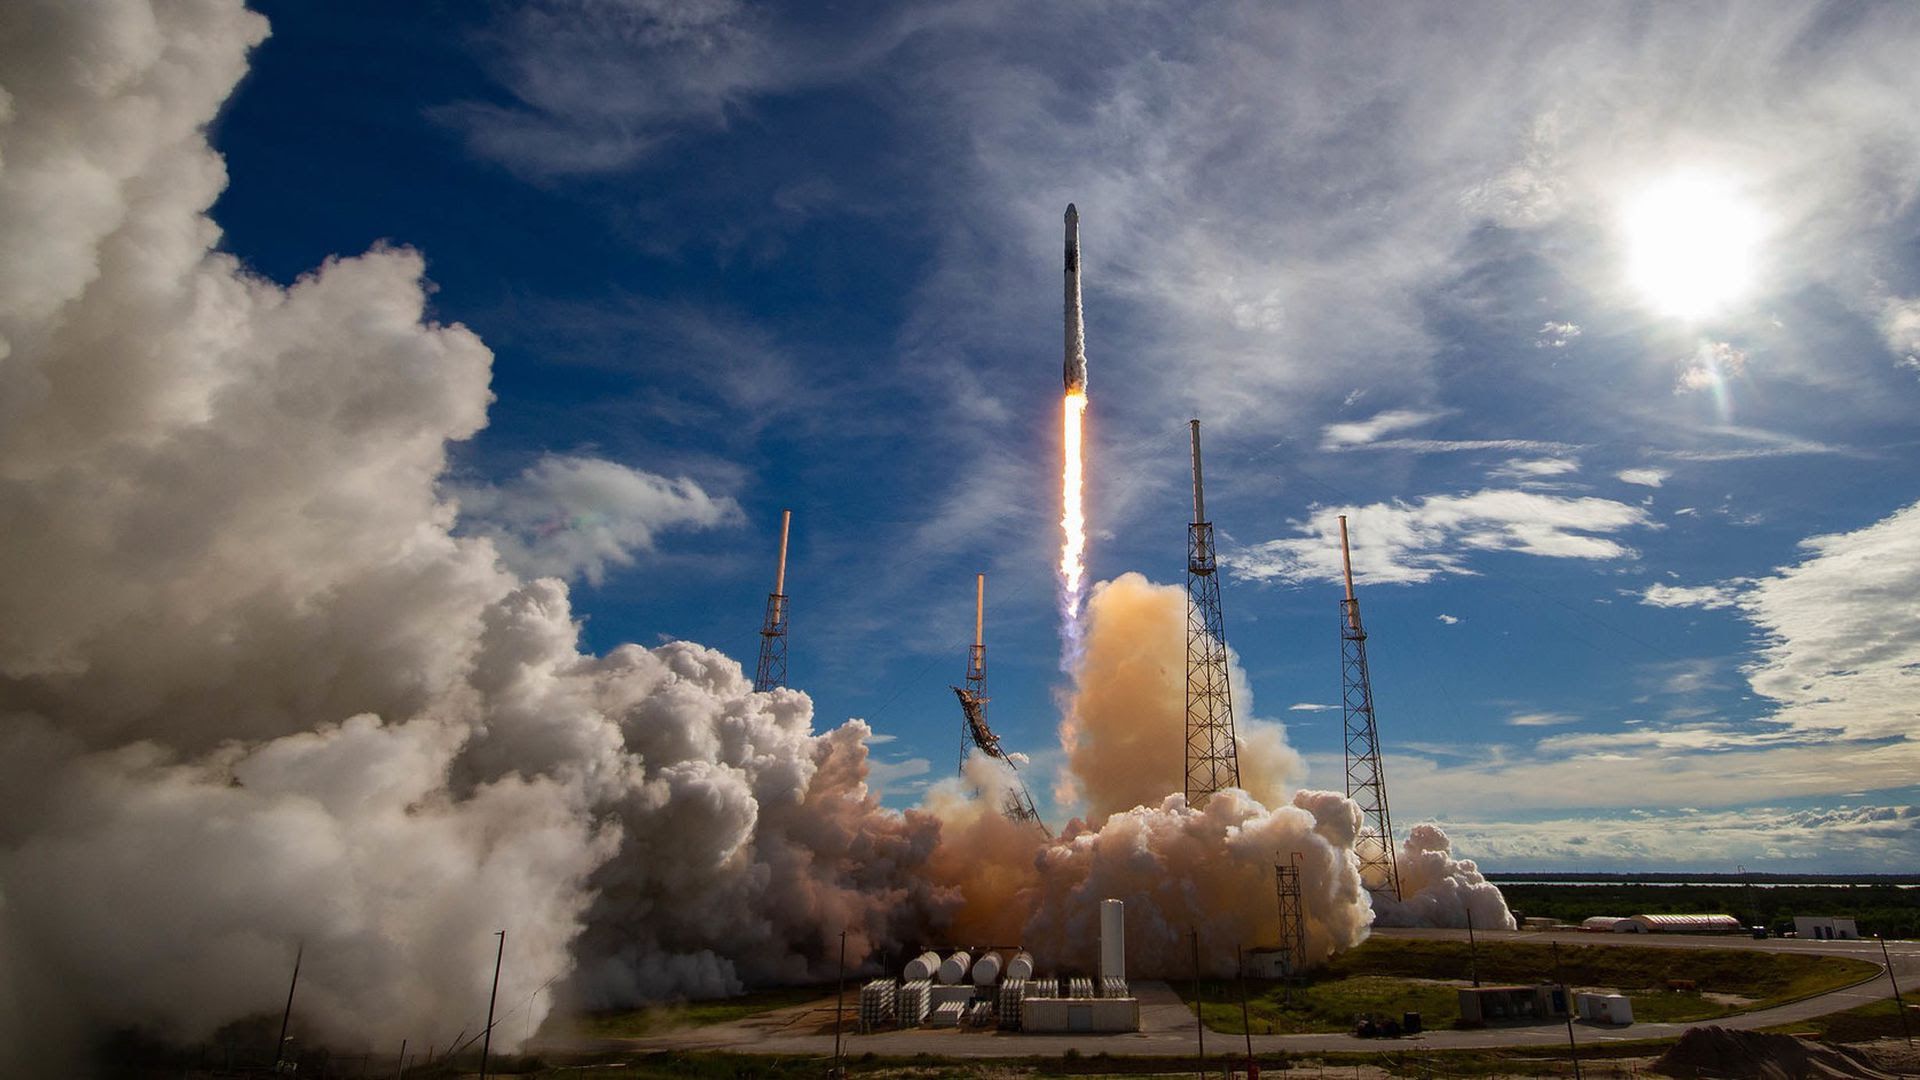 A SpaceX Falcon 9 rocket launching to space. Photo: SpaceX